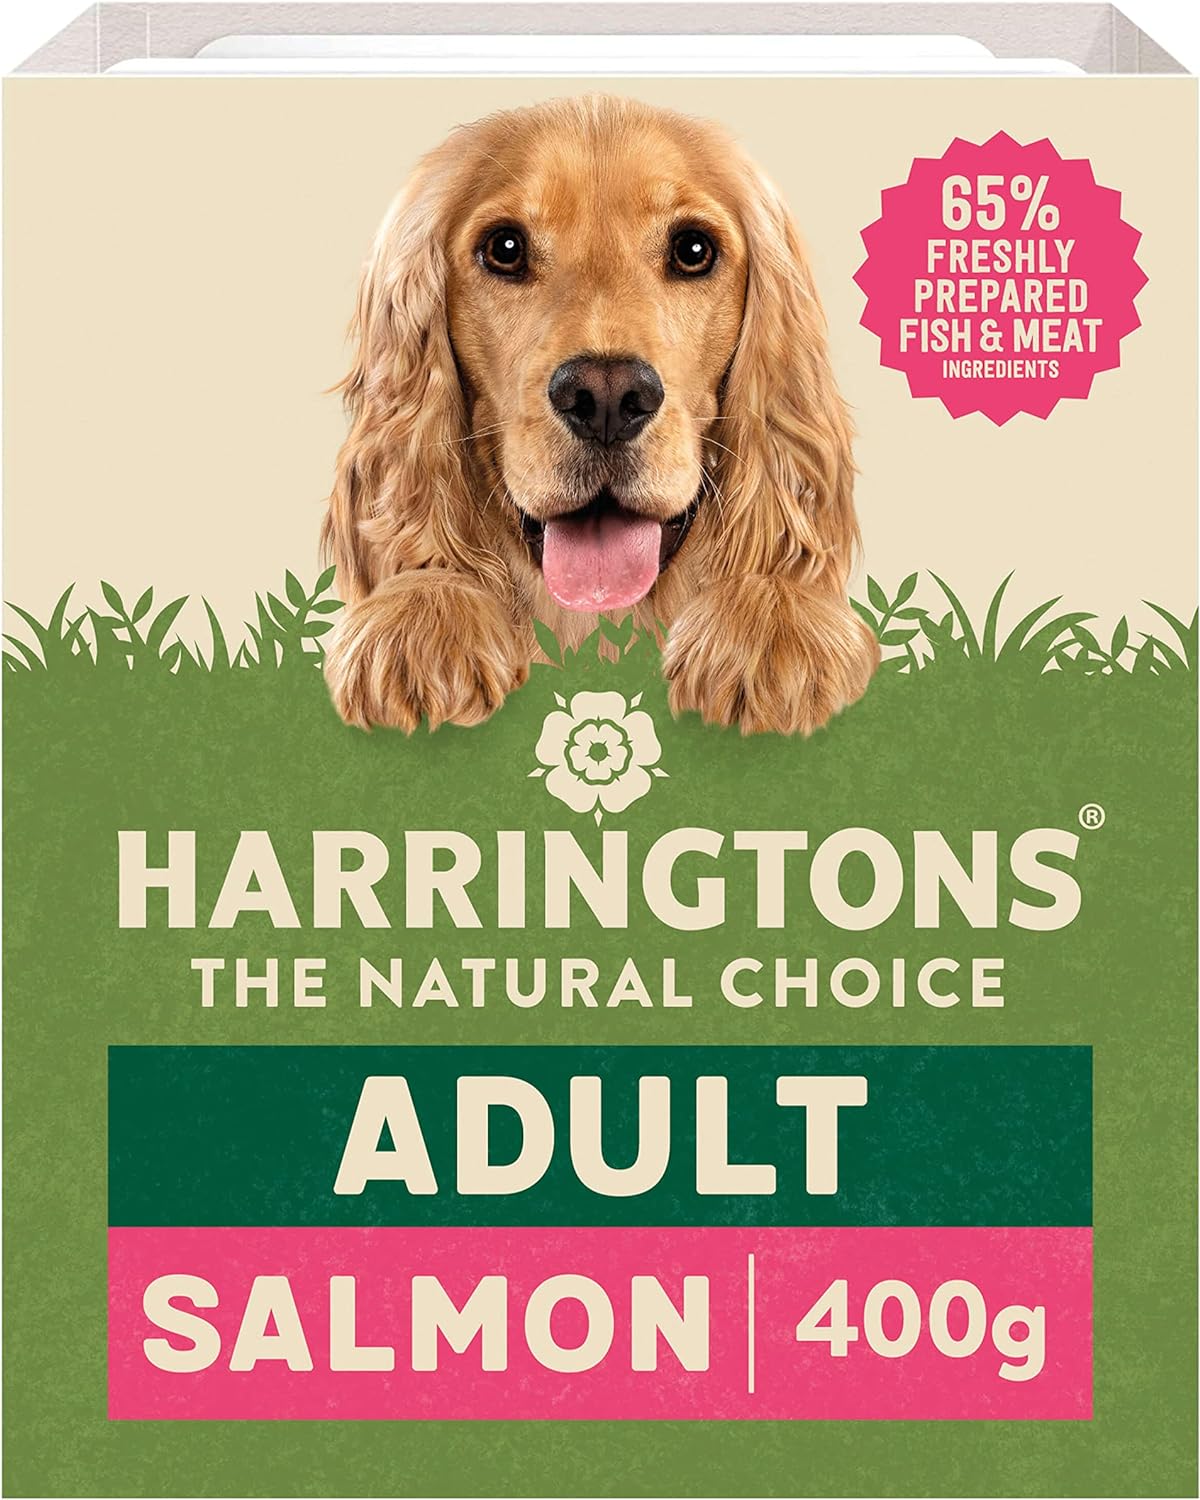 Harringtons Complete Wet Tray Grain Free Hypoallergenic Adult Dog Food Salmon & Potato 8x400g - Made with All Natural Ingredients?HARRWS-C400